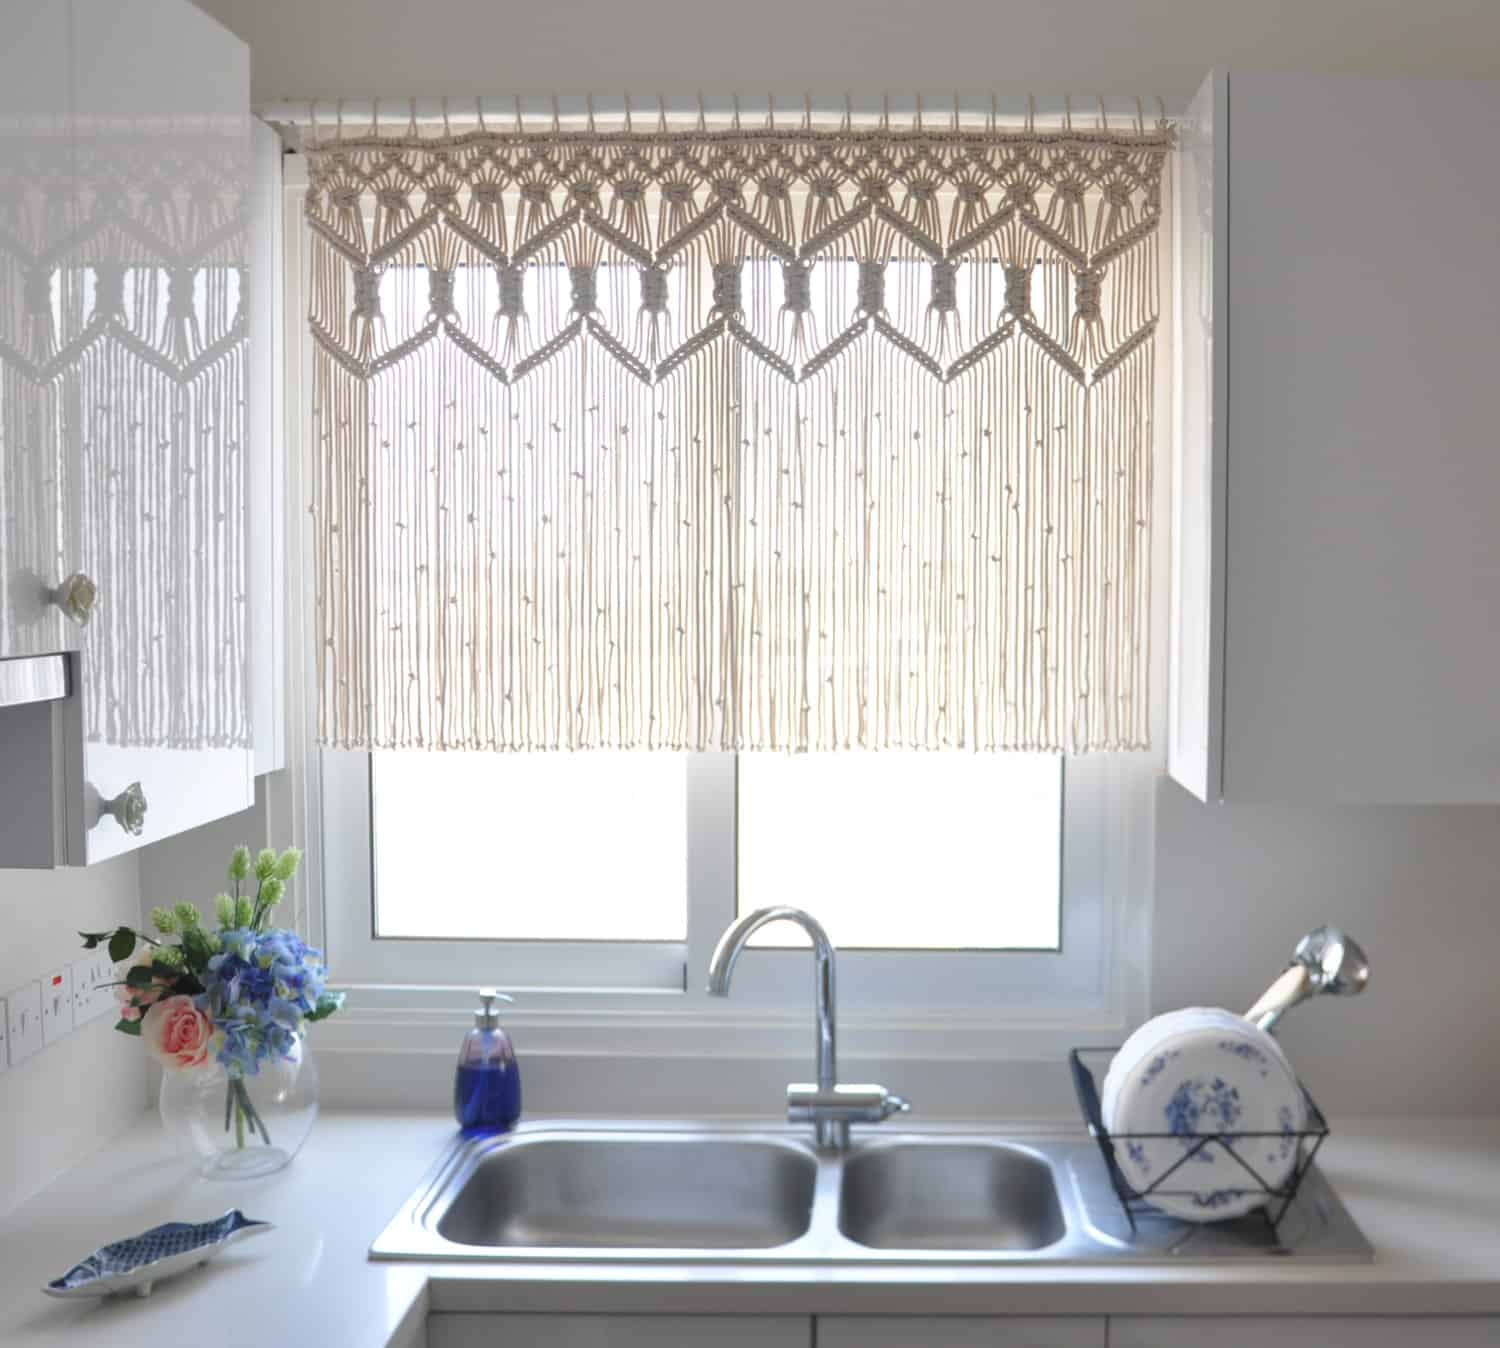 Modern Kitchen Curtains And Valances
 Selection of Kitchen Curtains for Modern Home Decoration